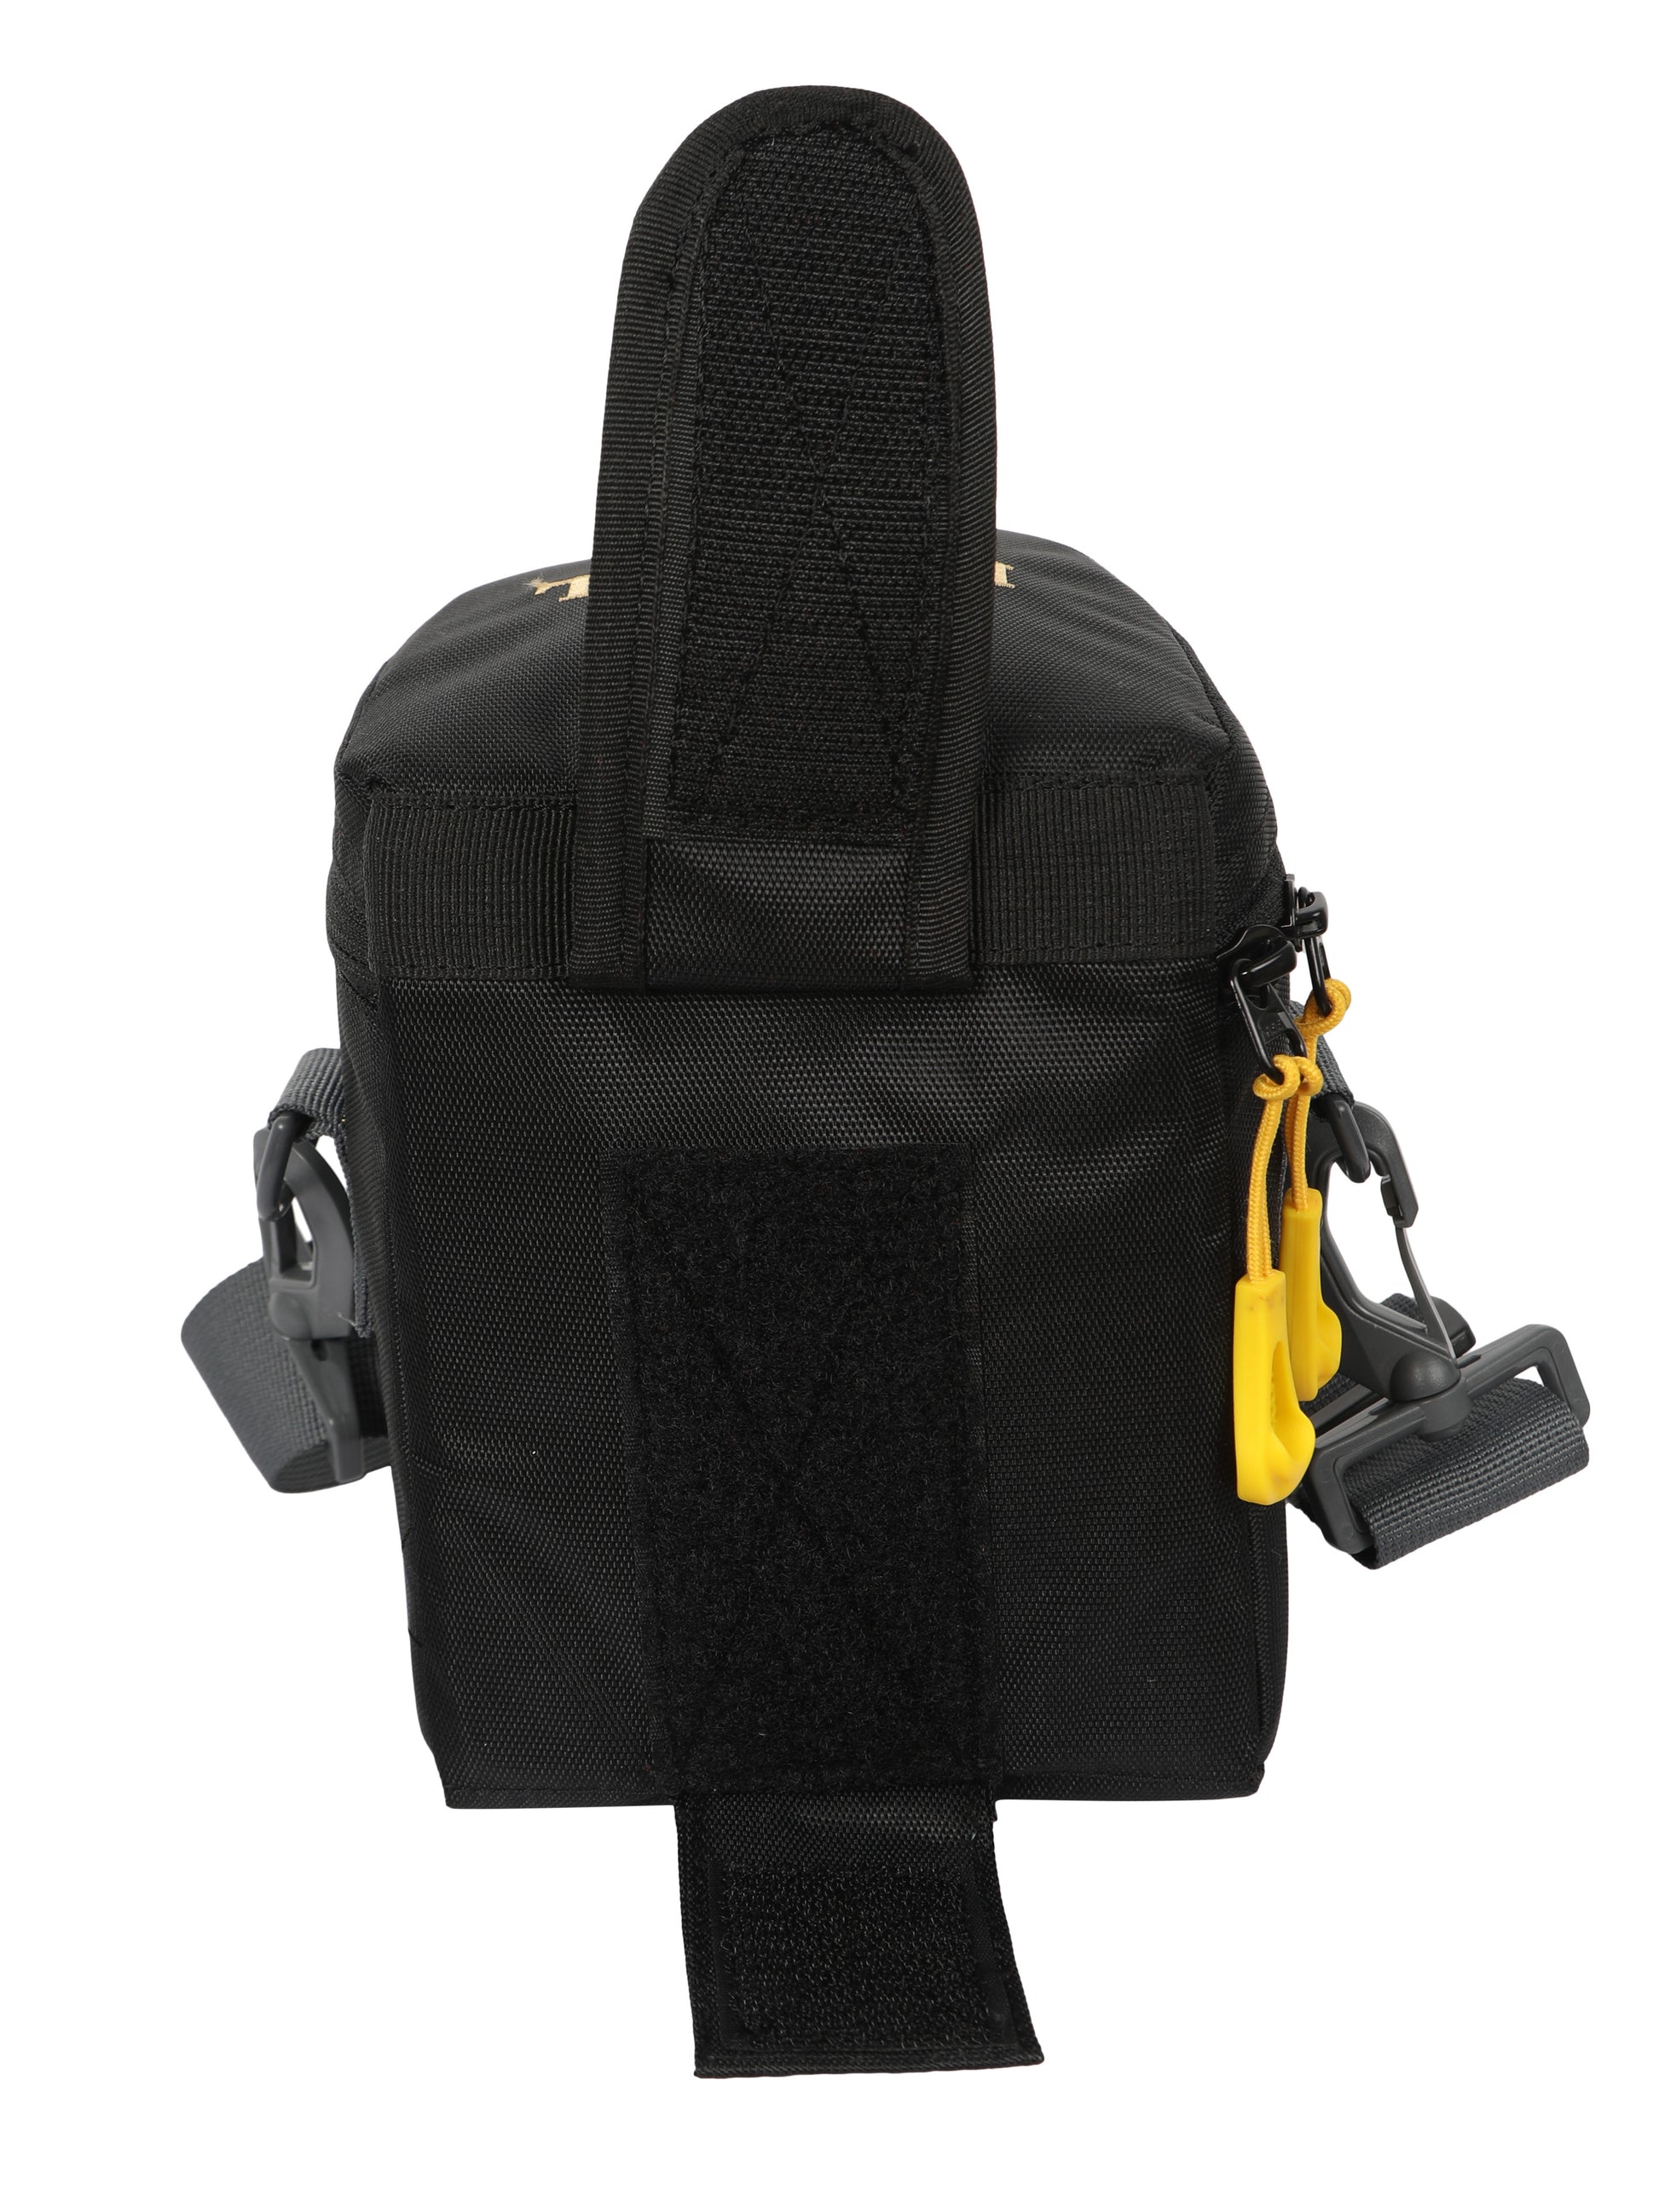 Image: Back view of the P62 Lens Pack 1, displaying the waist strap that can be attached to a belt for secure and comfortable wear. The bag also features a sling that can be worn around the neck for easy access to the lens. Enjoy versatile carrying options and keep your lens within reach with the P62 Lens Pack 1.